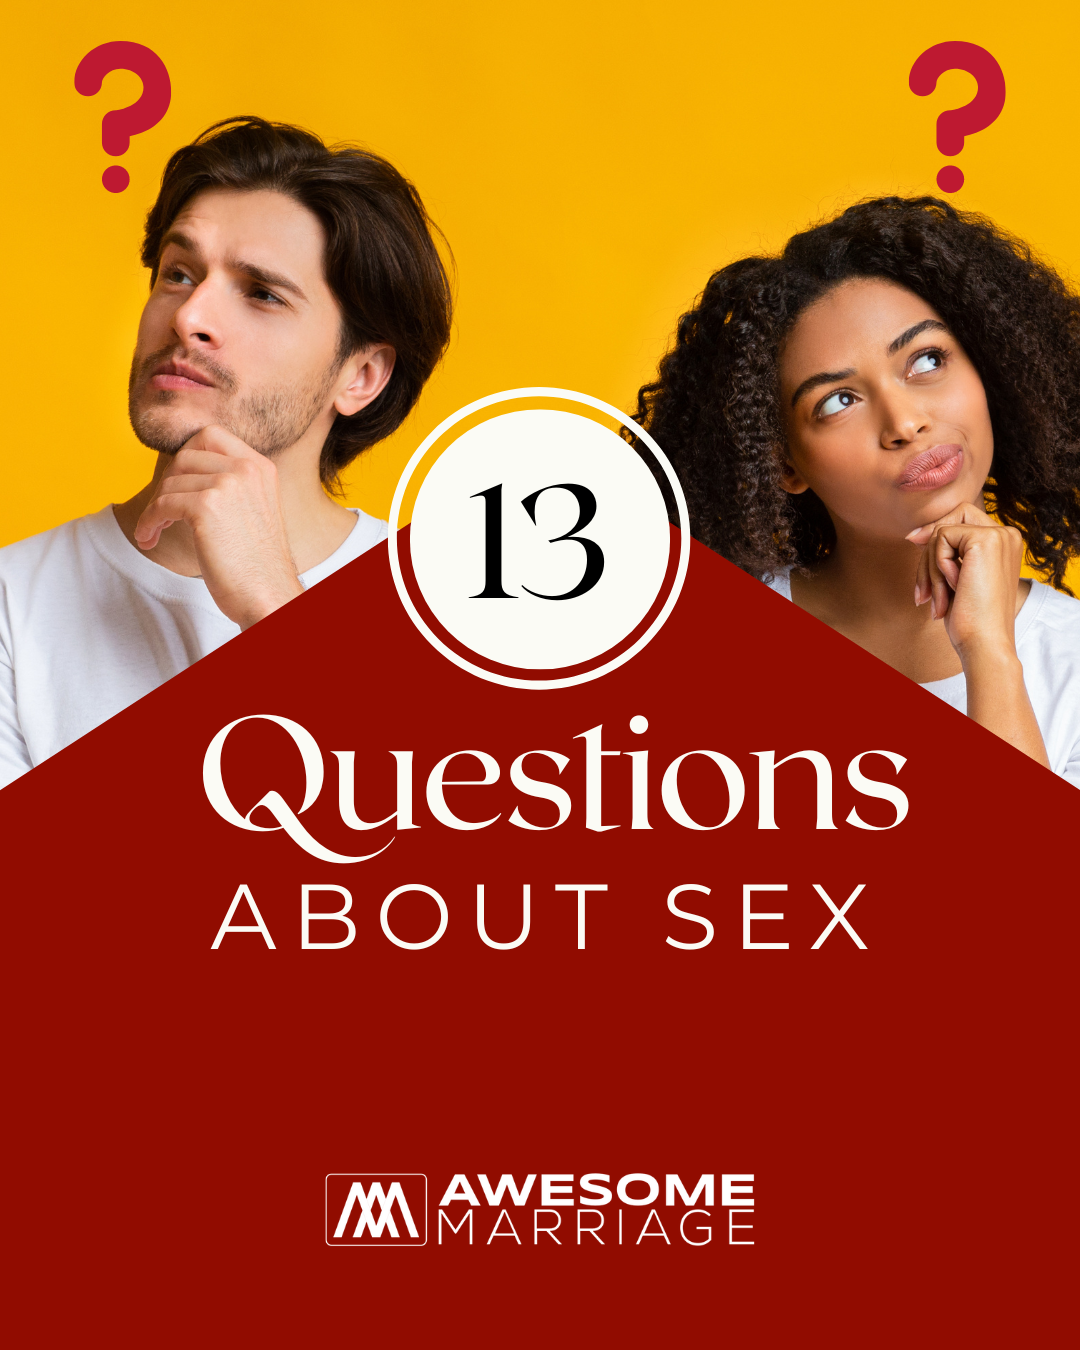 questions to ask my wife about sex — Blog — Awesome Marriage — Marriage, Relationships, and Premarital Counseling with Dr image